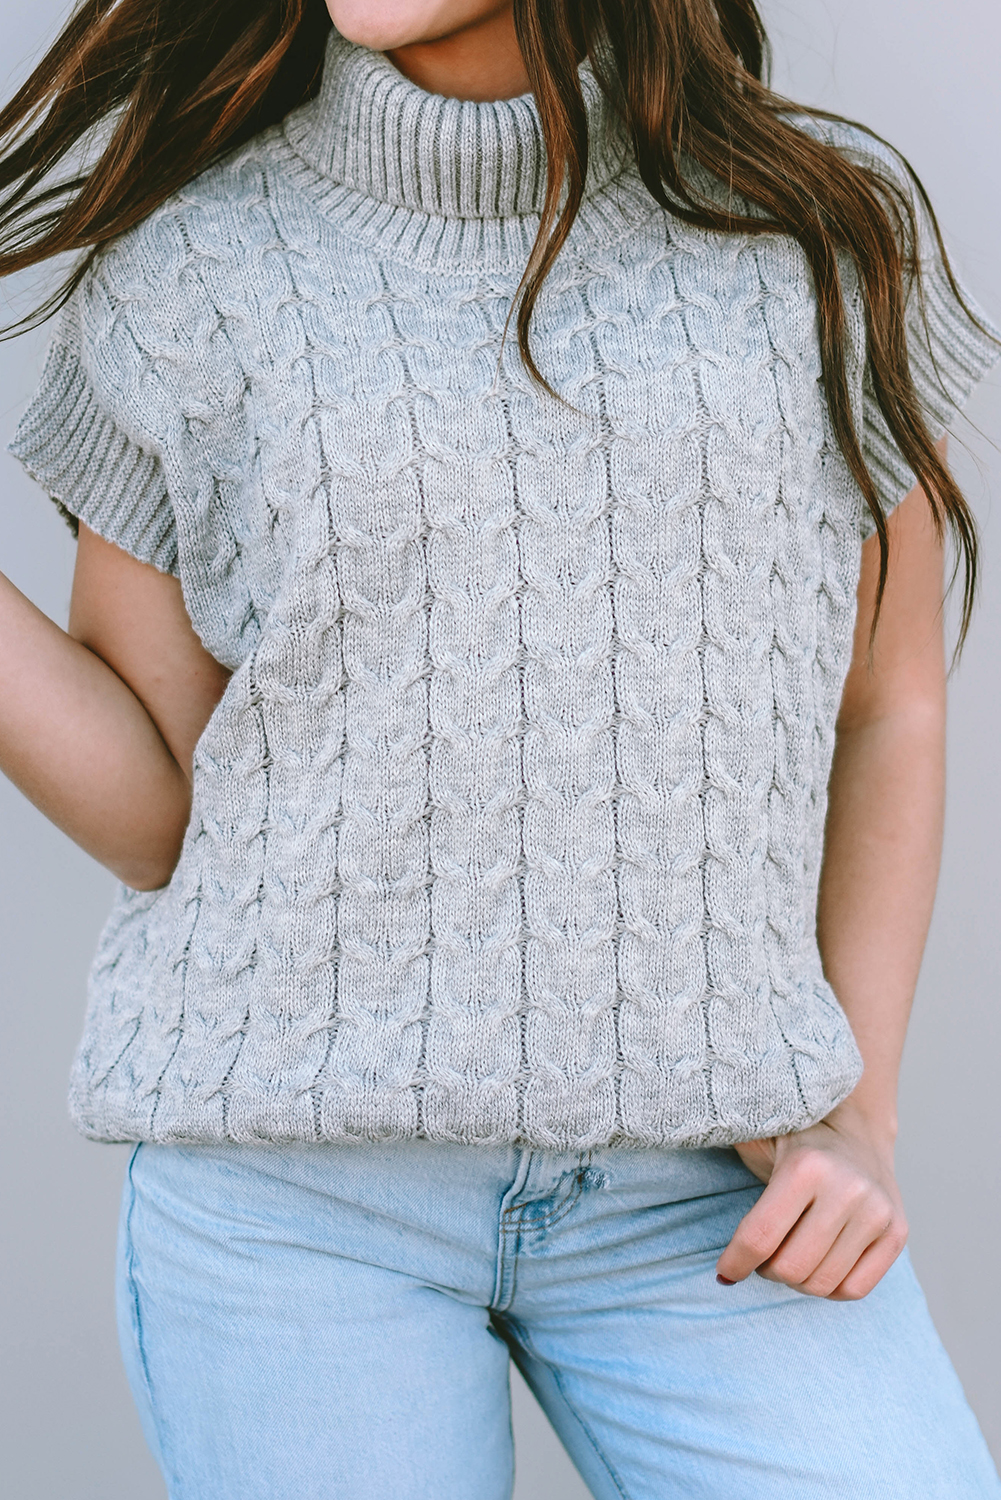 Shewin Wholesale New arrival Medium Grey Cable Knit Turtleneck Short Dolman Sleeve SWEATER